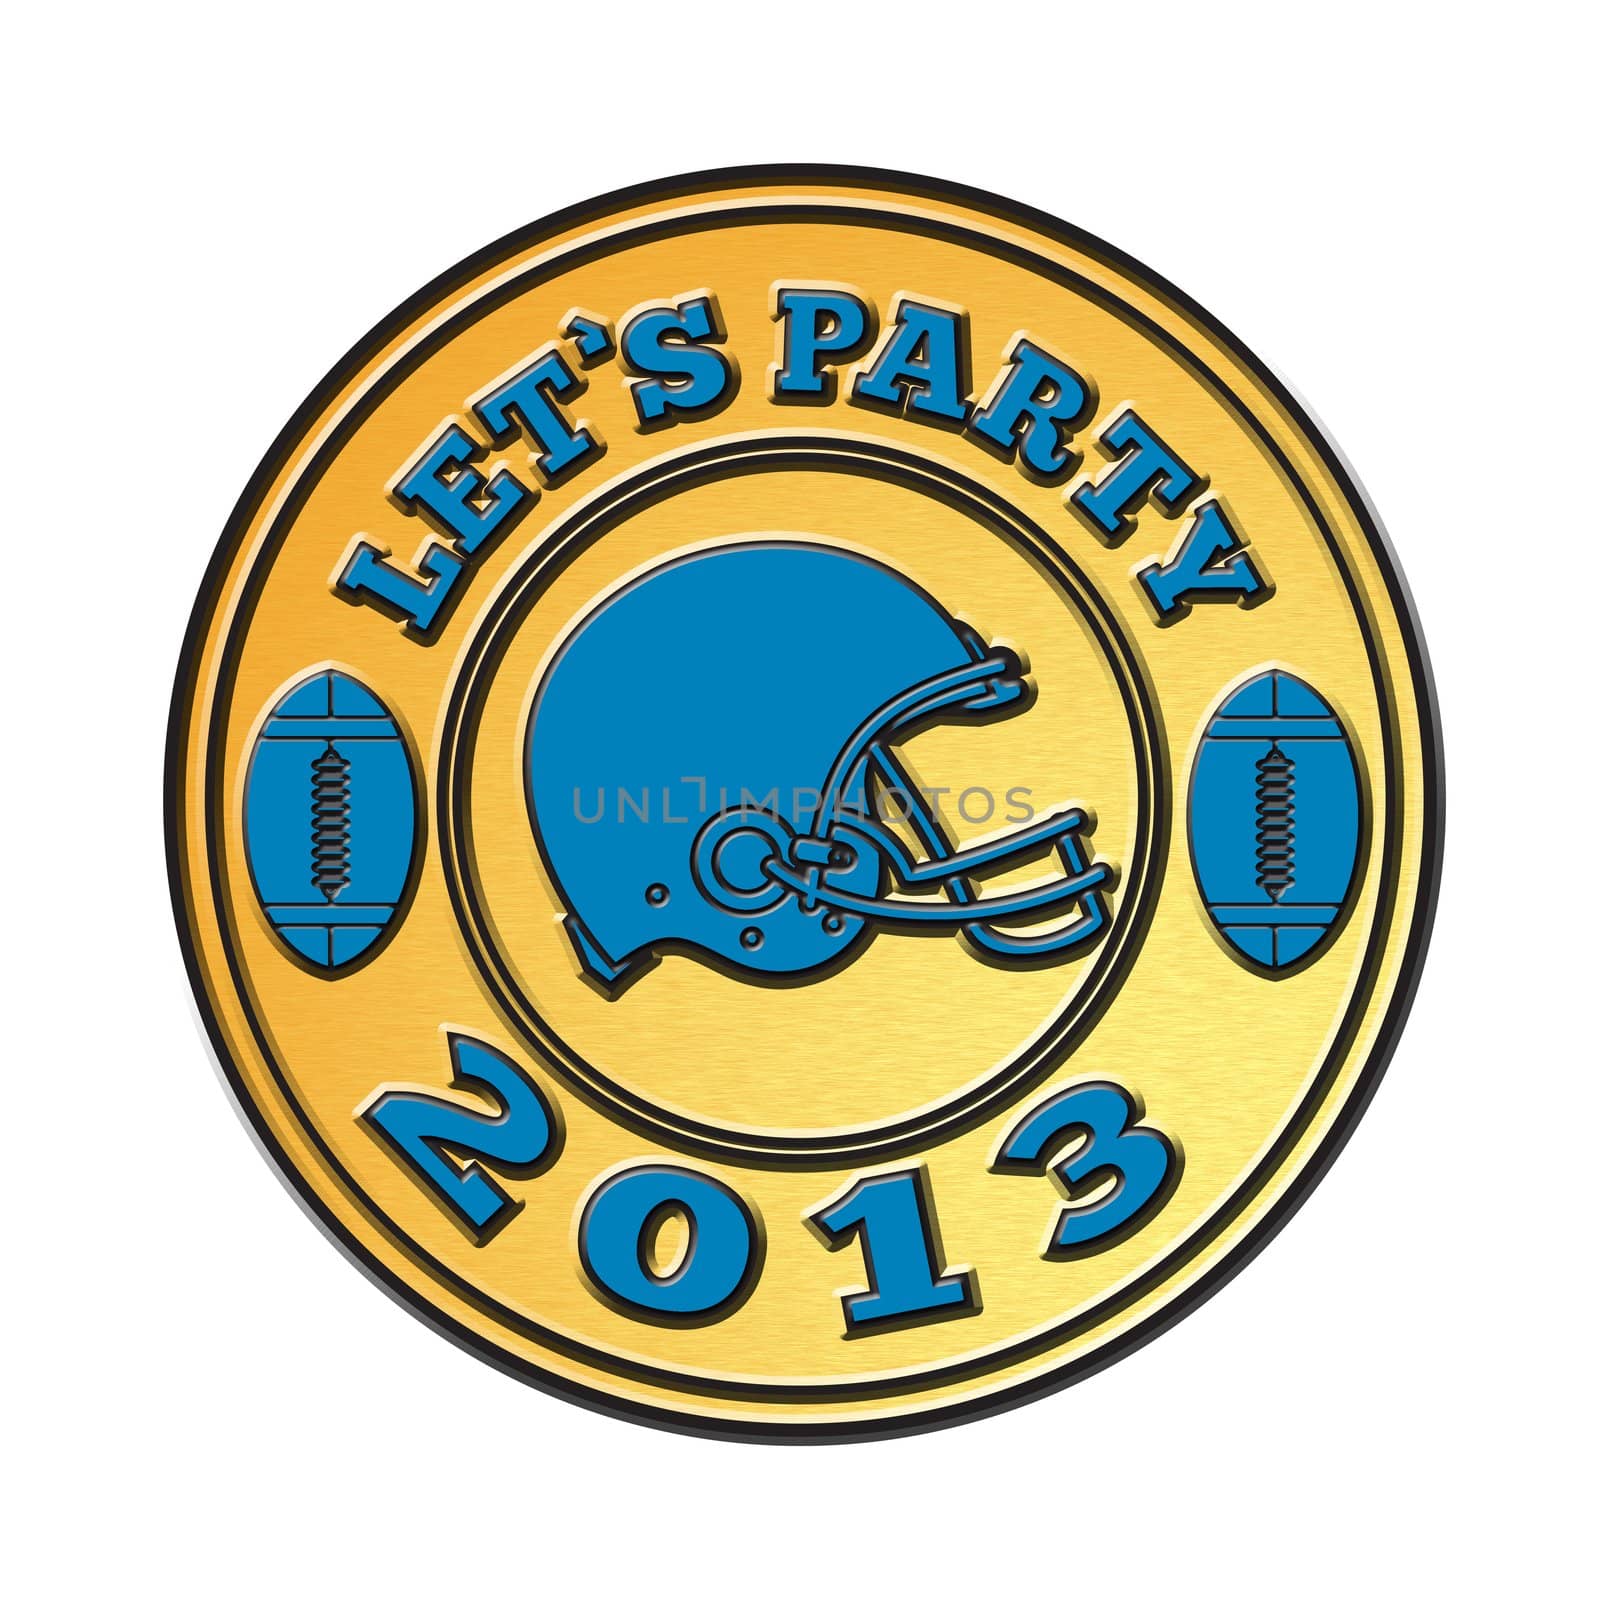 illustration of a golden american football helmet viewed from side done in metallic gold style set inside medallion circle on isolated white background with words let's party 2013.